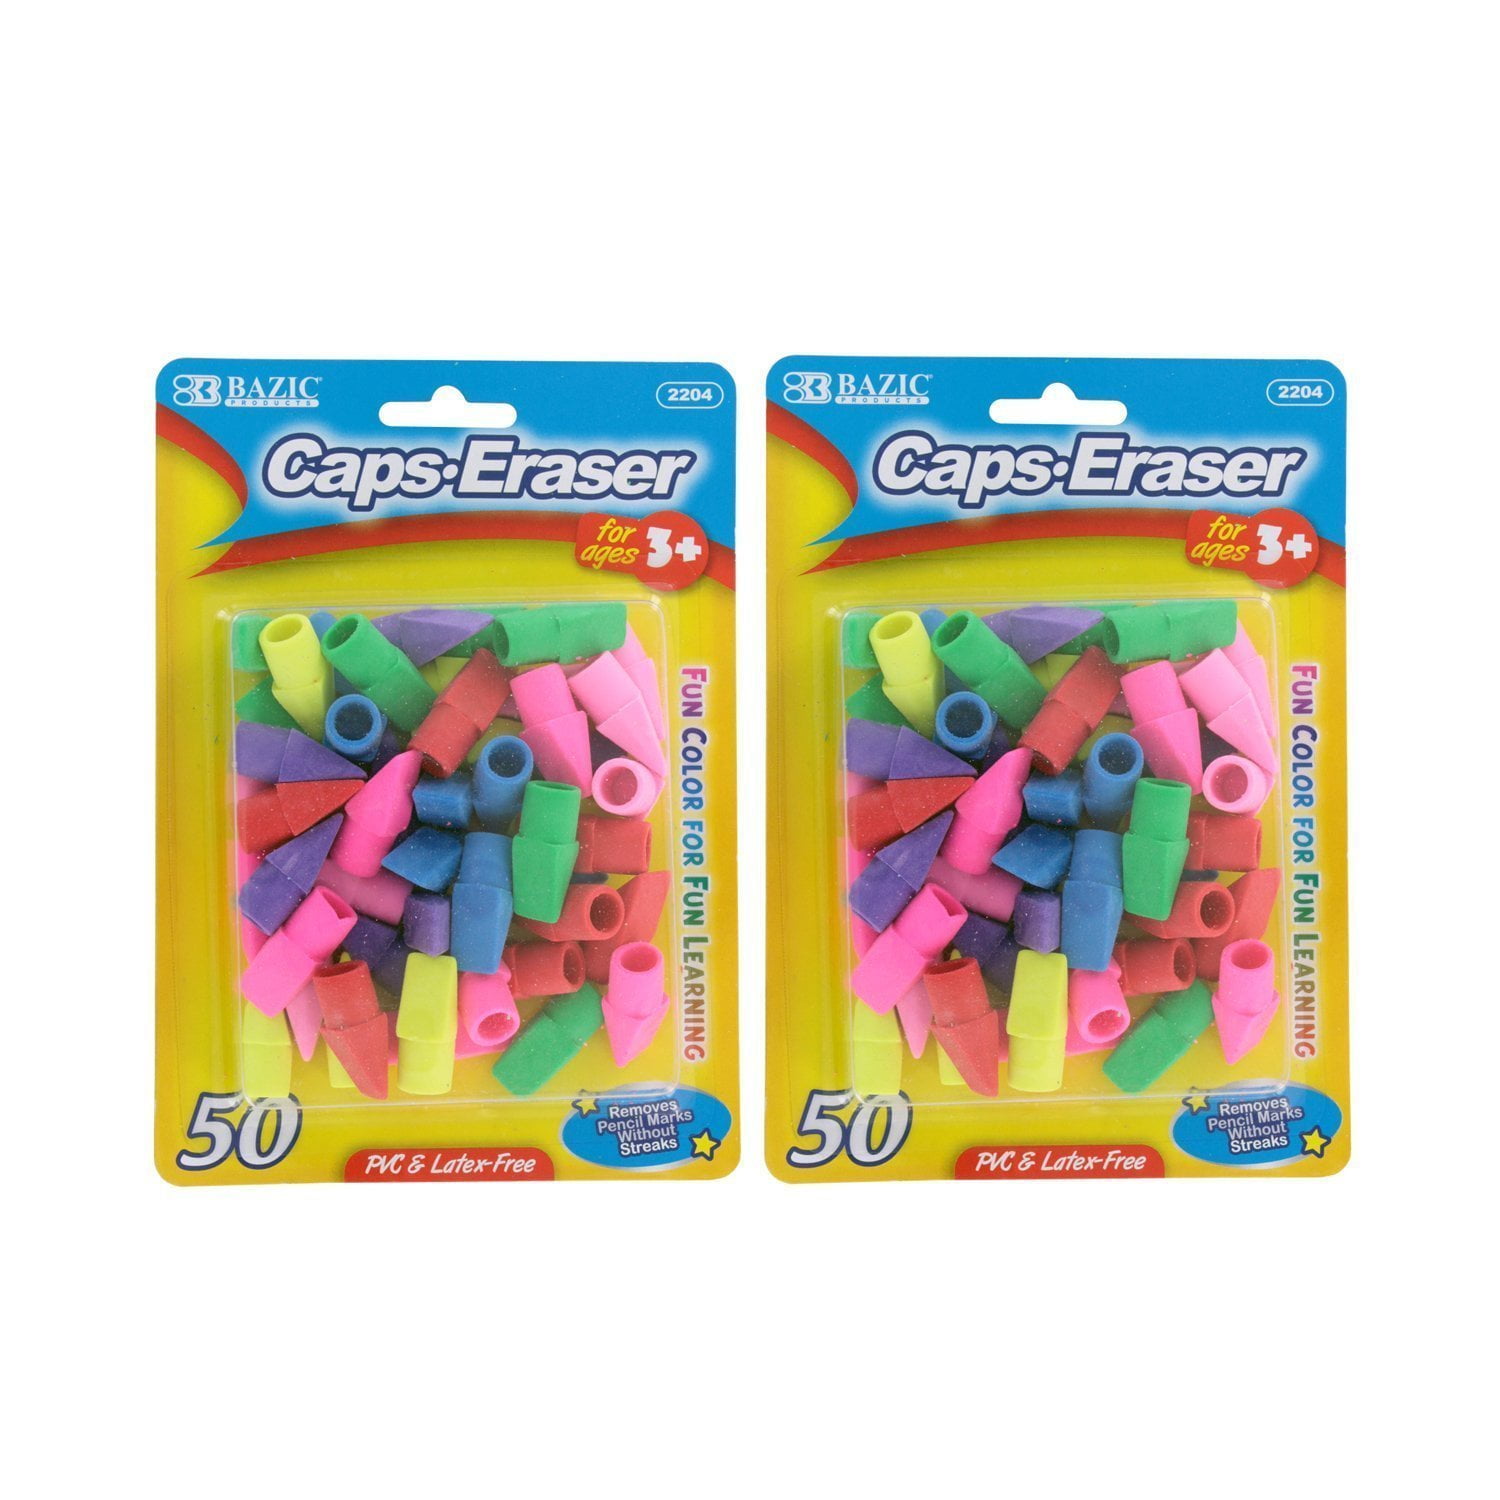 24 x Pencil Top Erasers Rubbers Angled Tips Assorted Colours Good Value Caps 